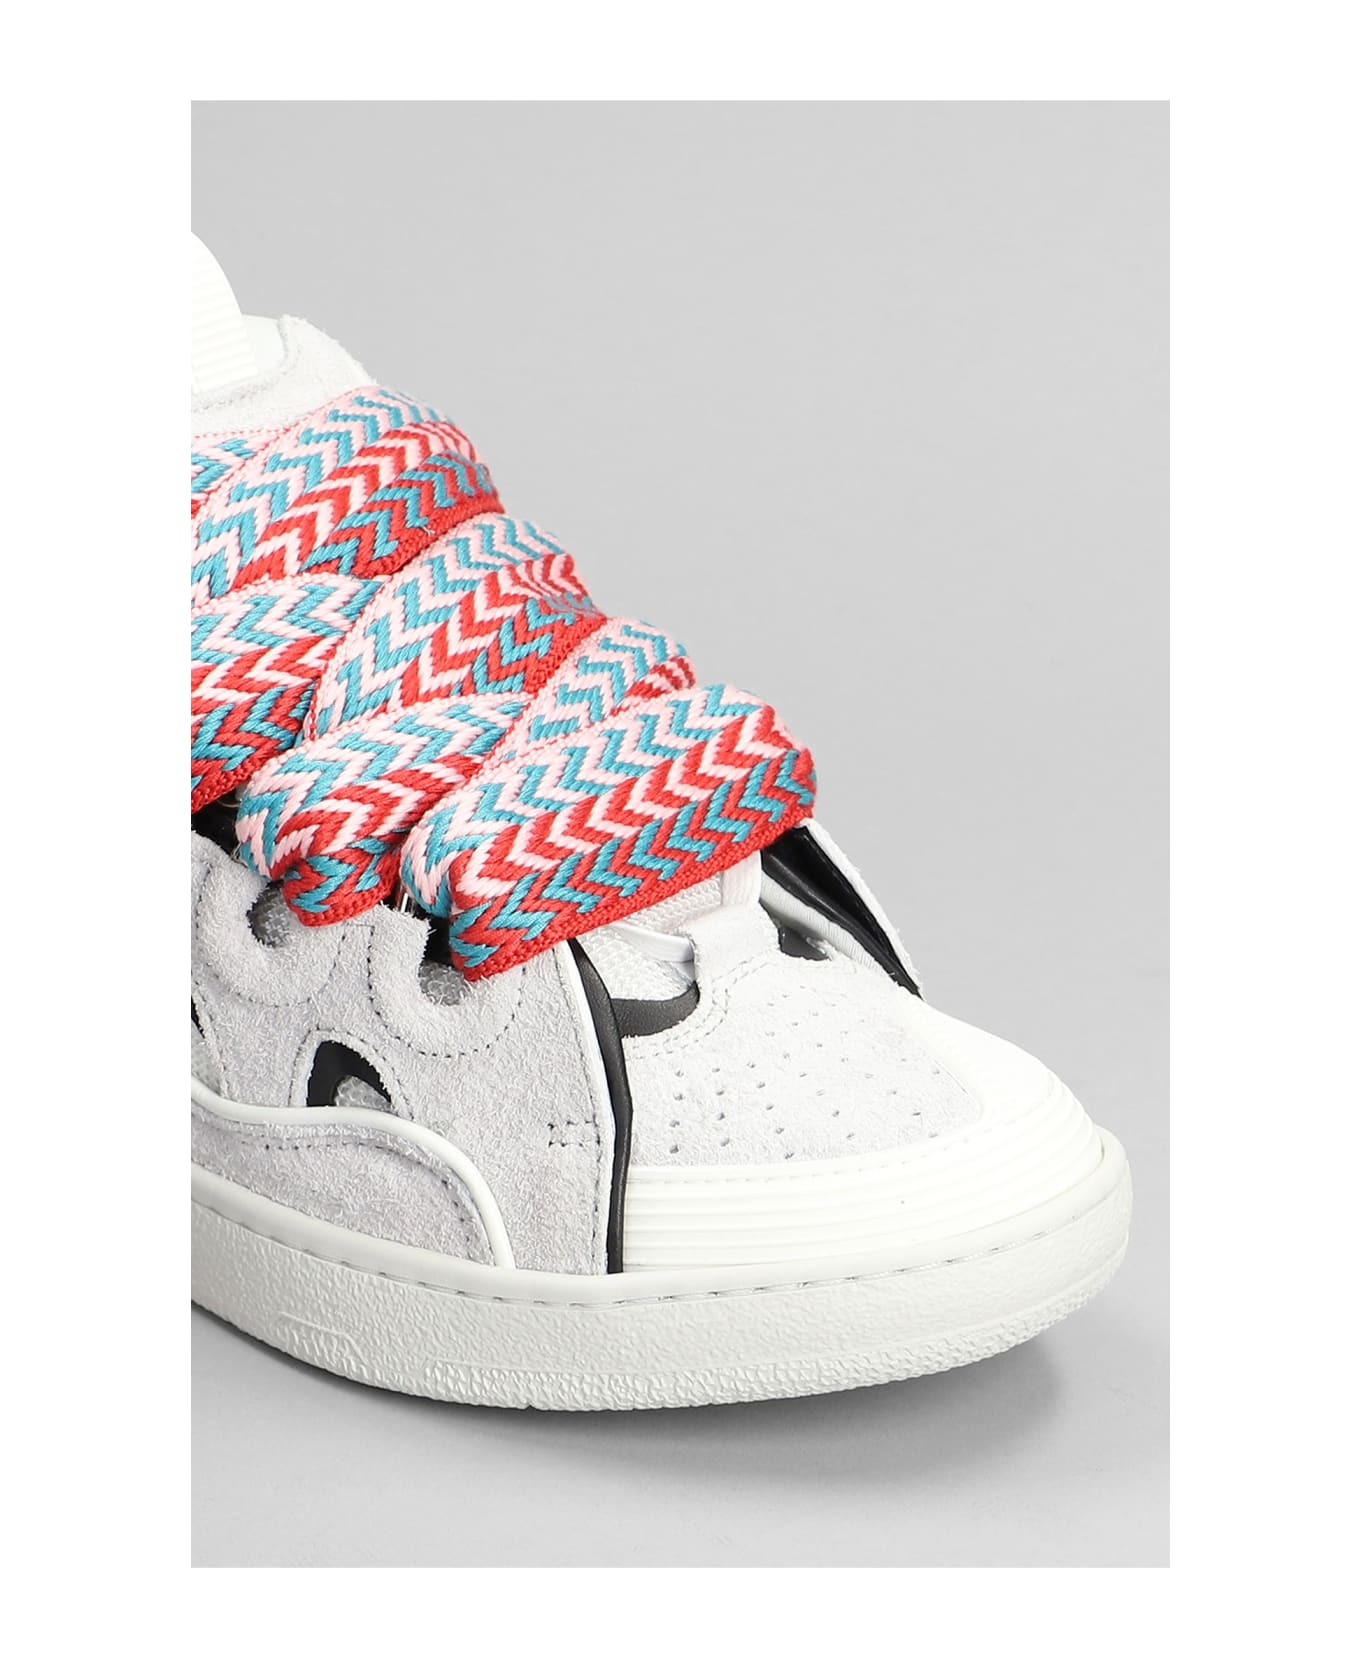 Lanvin Curb Sneakers In White Leather - white